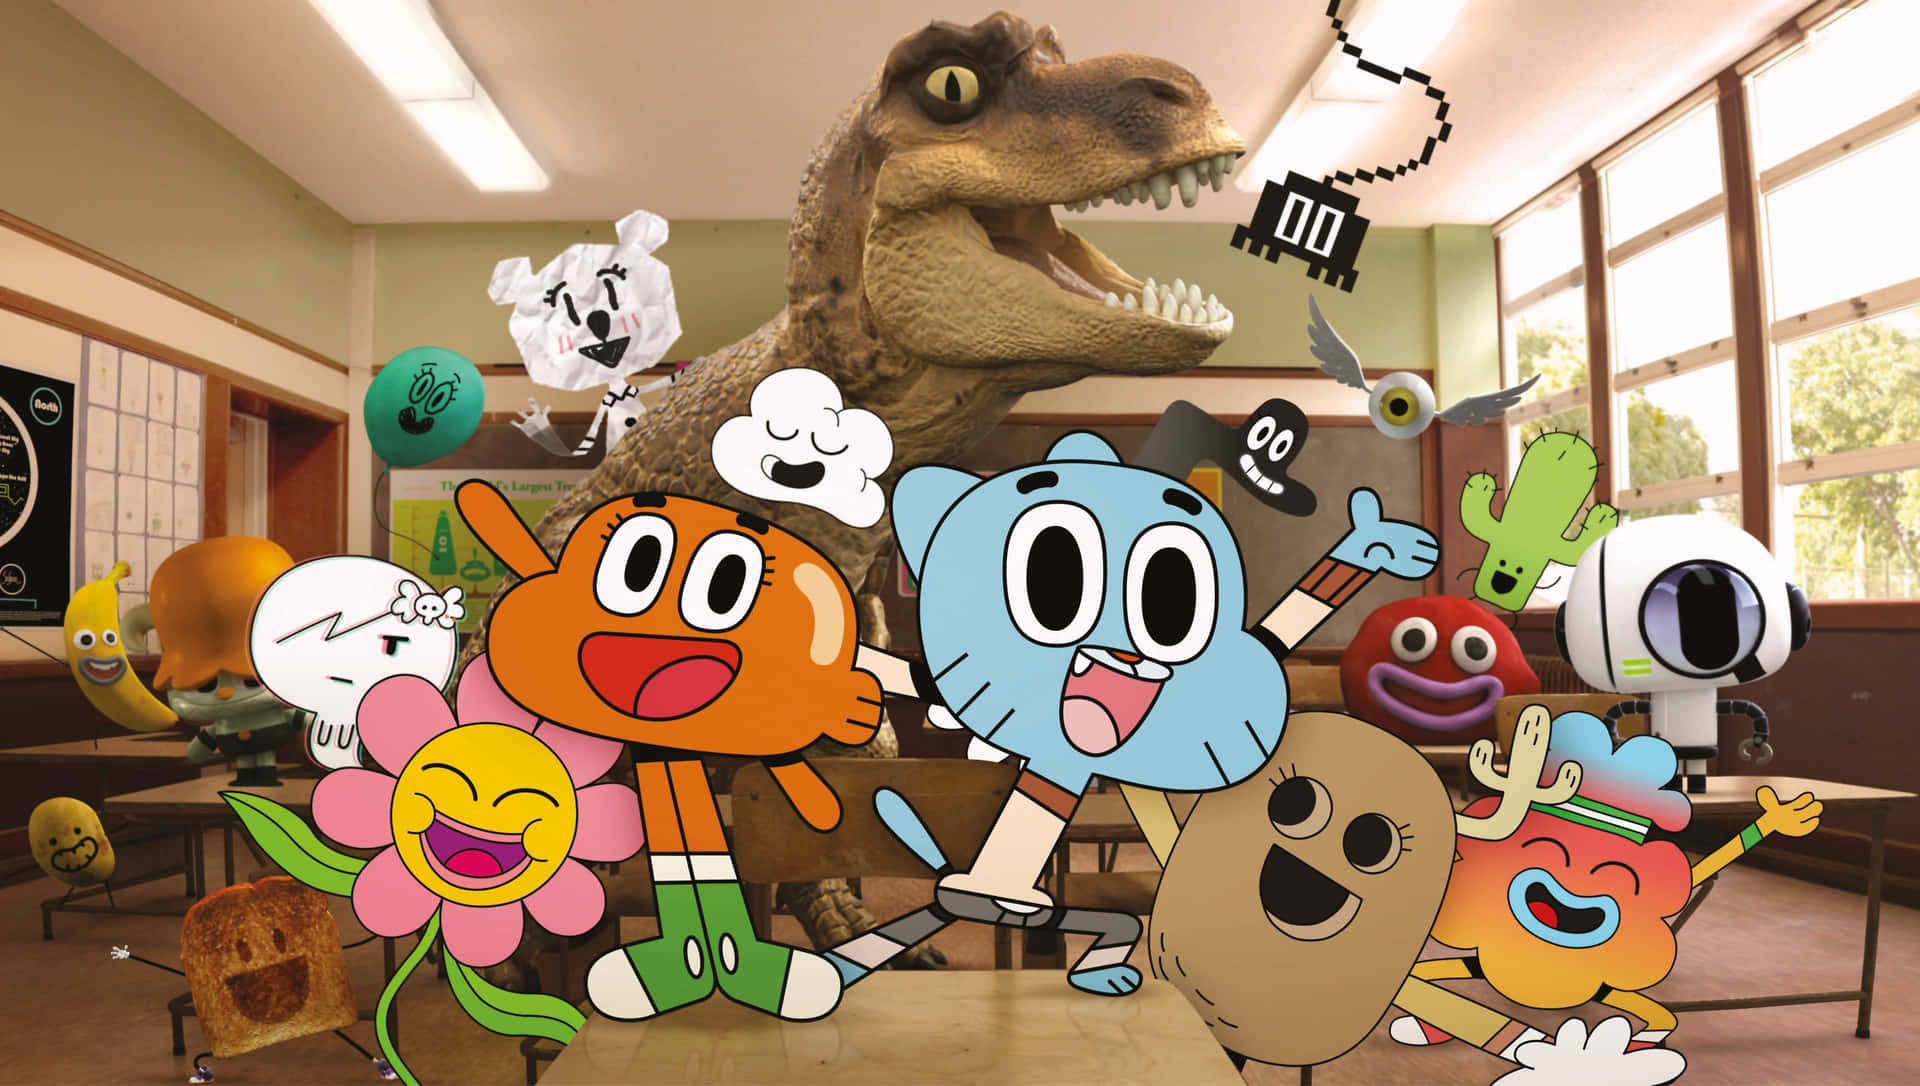 The Amazing World of Gumball: Fun Adventures of Gumball Watterson and Friends Wallpaper